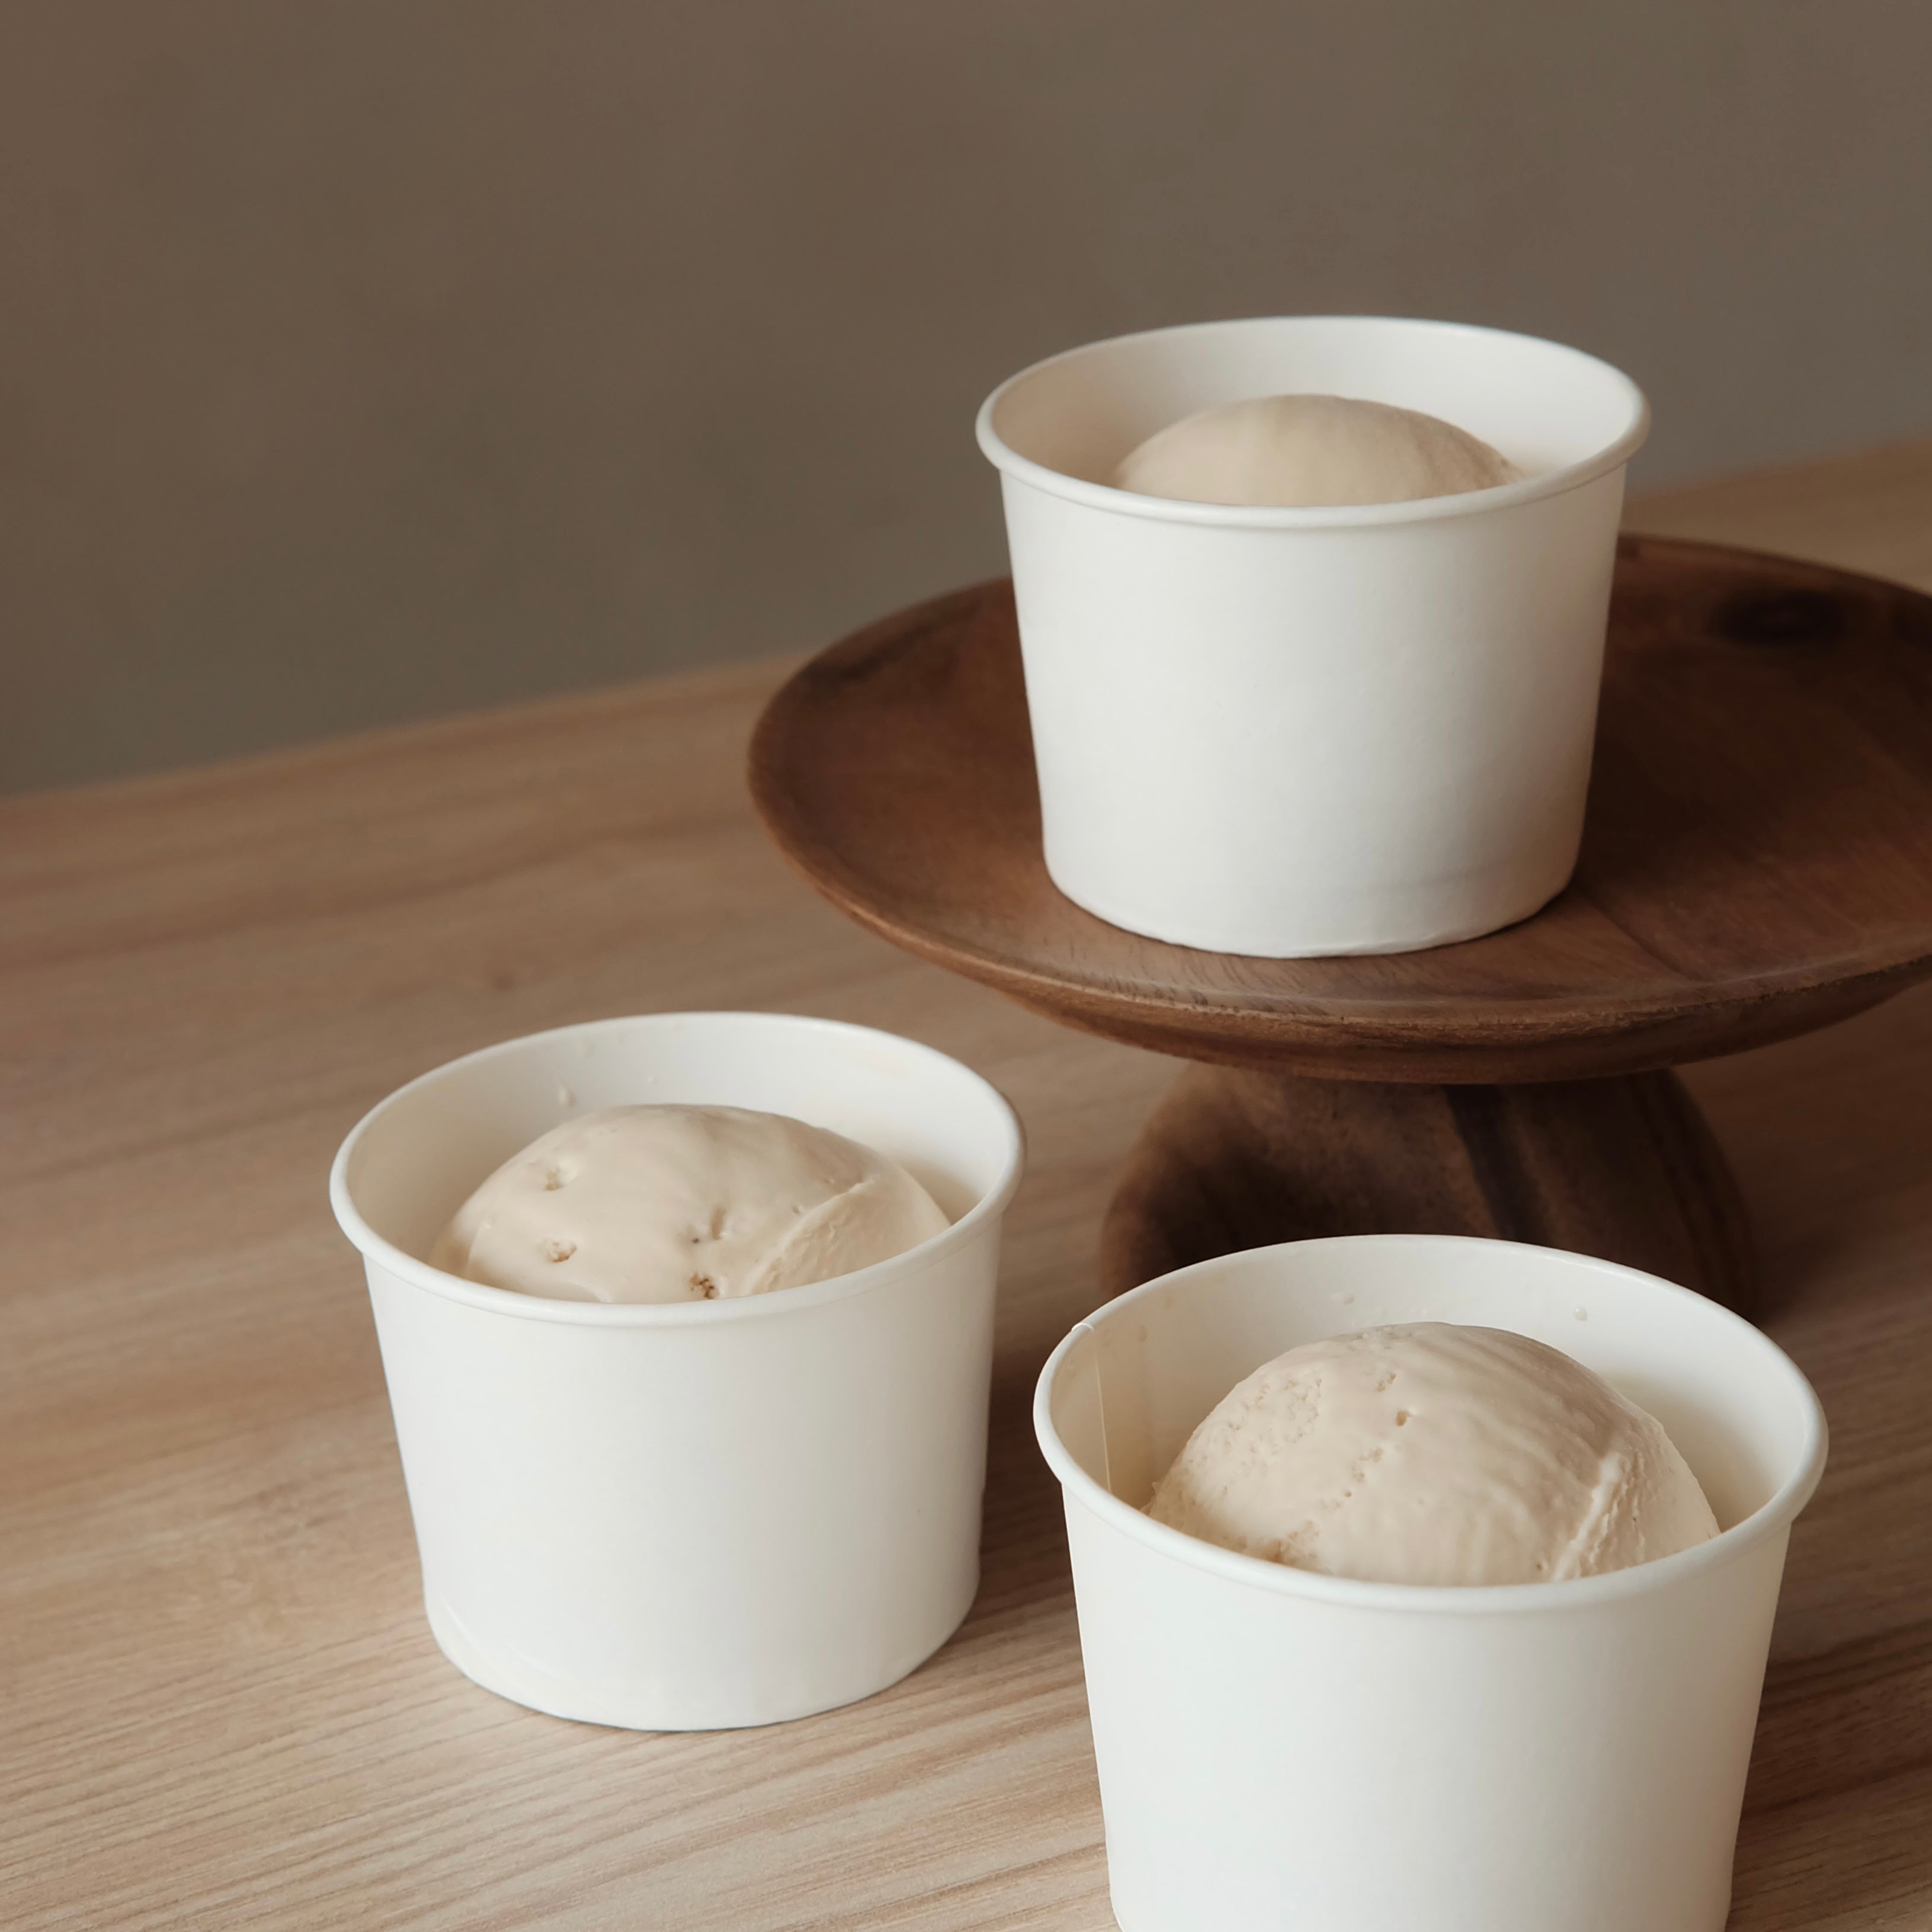 Earl Grey Lavender Ice Cream Set: A Symphony of Elegance and Aroma